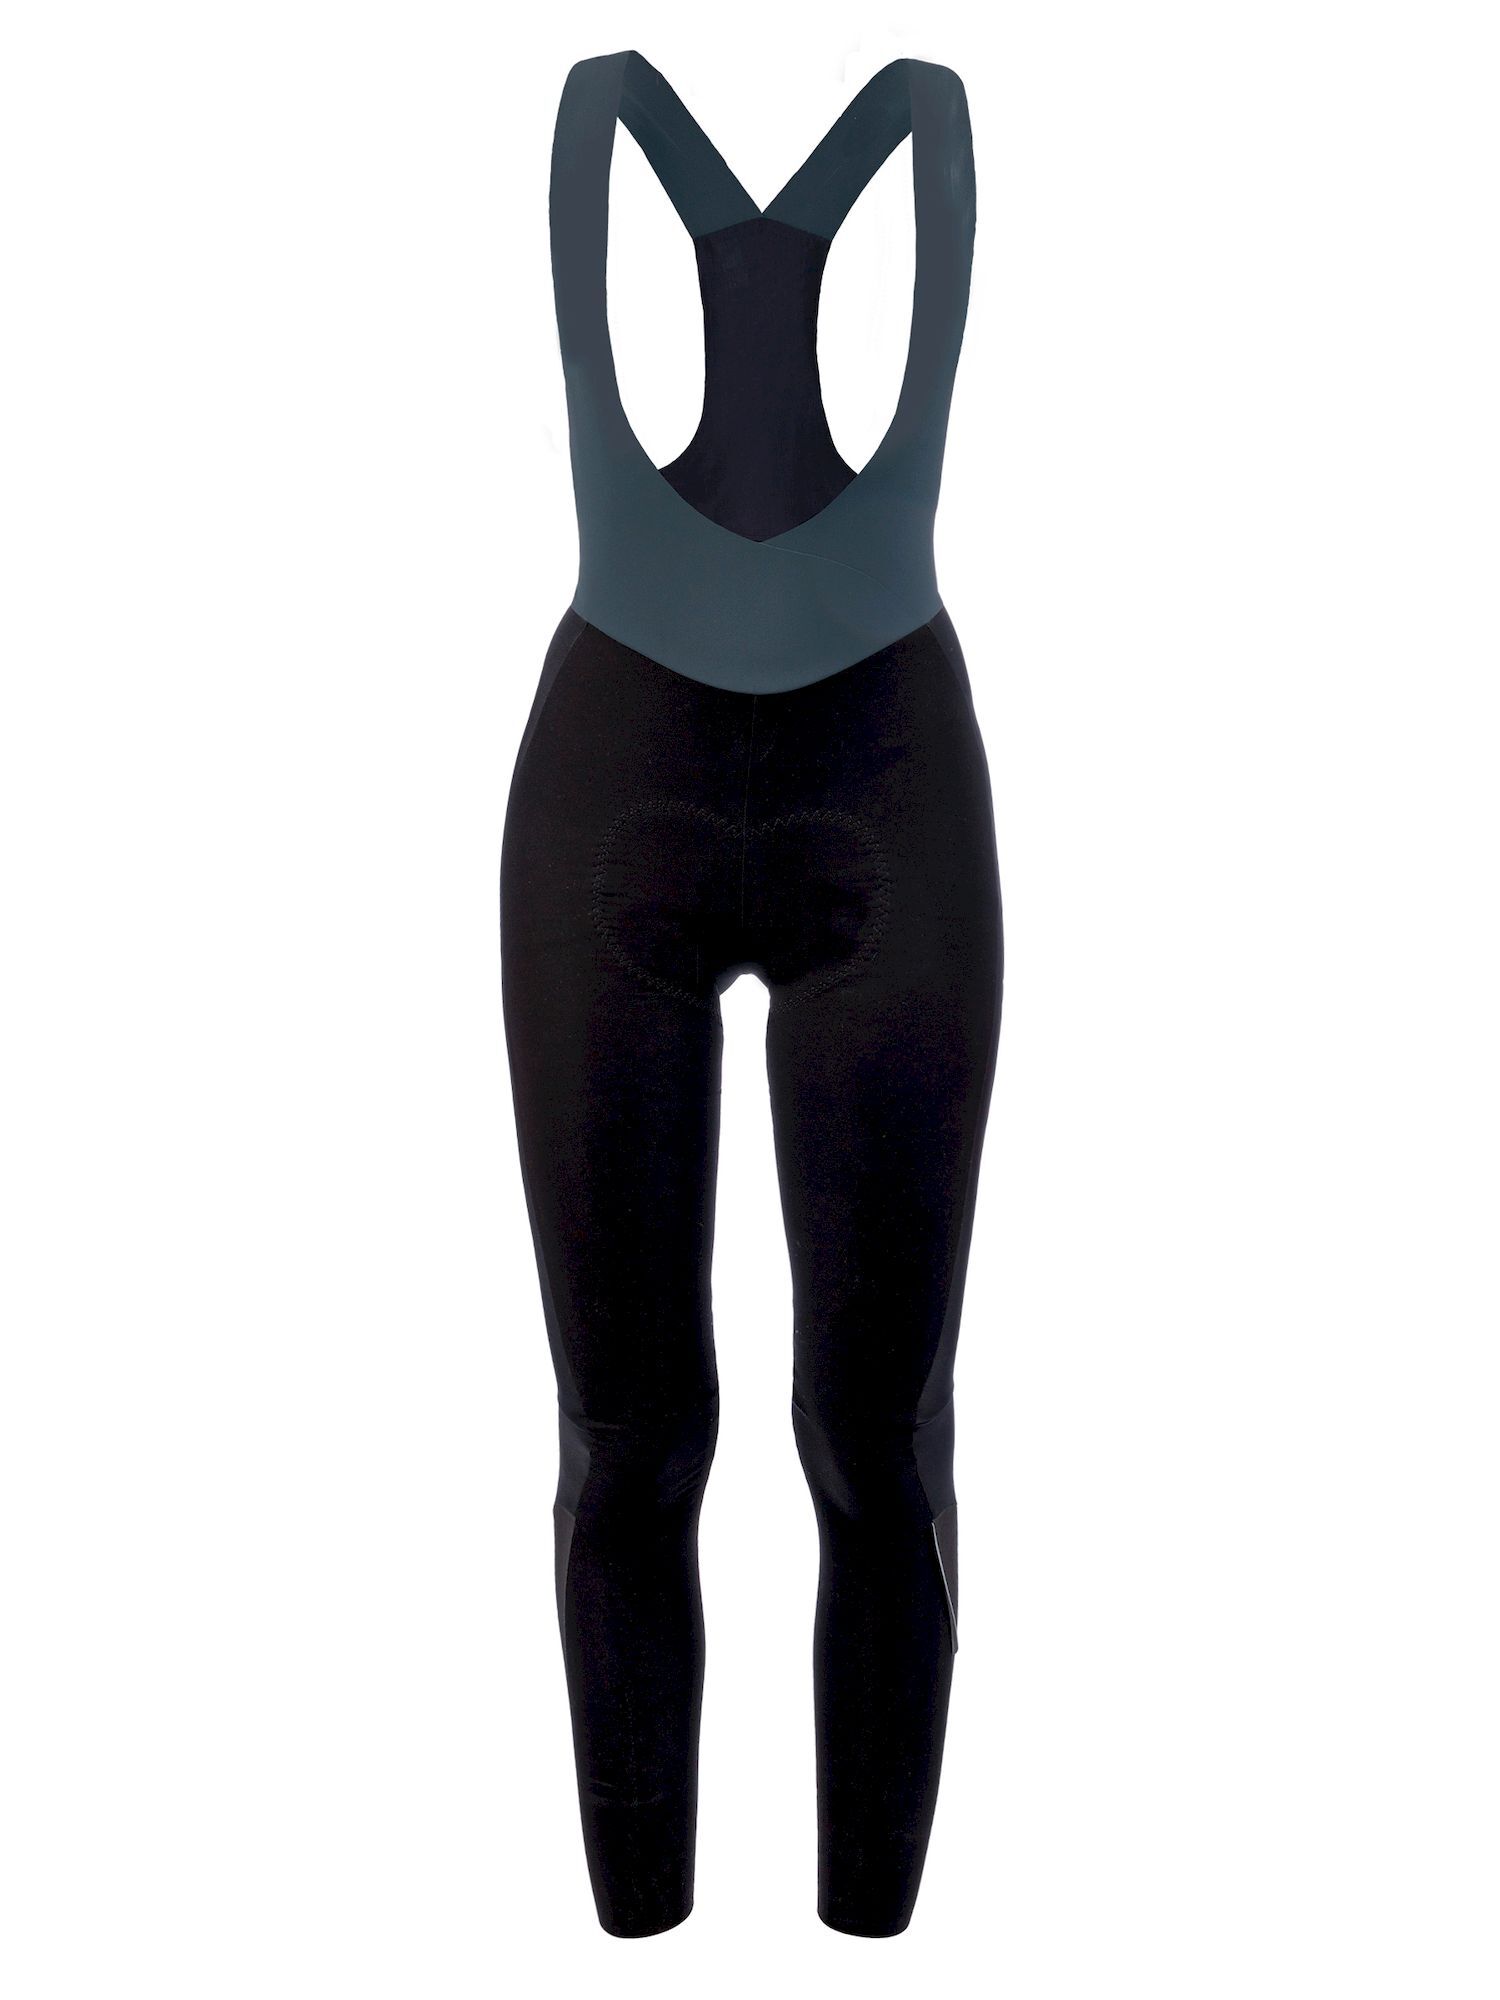 Q36.5 Long Salopette L1 Woman With Insert - Culottes de ciclismo - Mujer | Hardloop